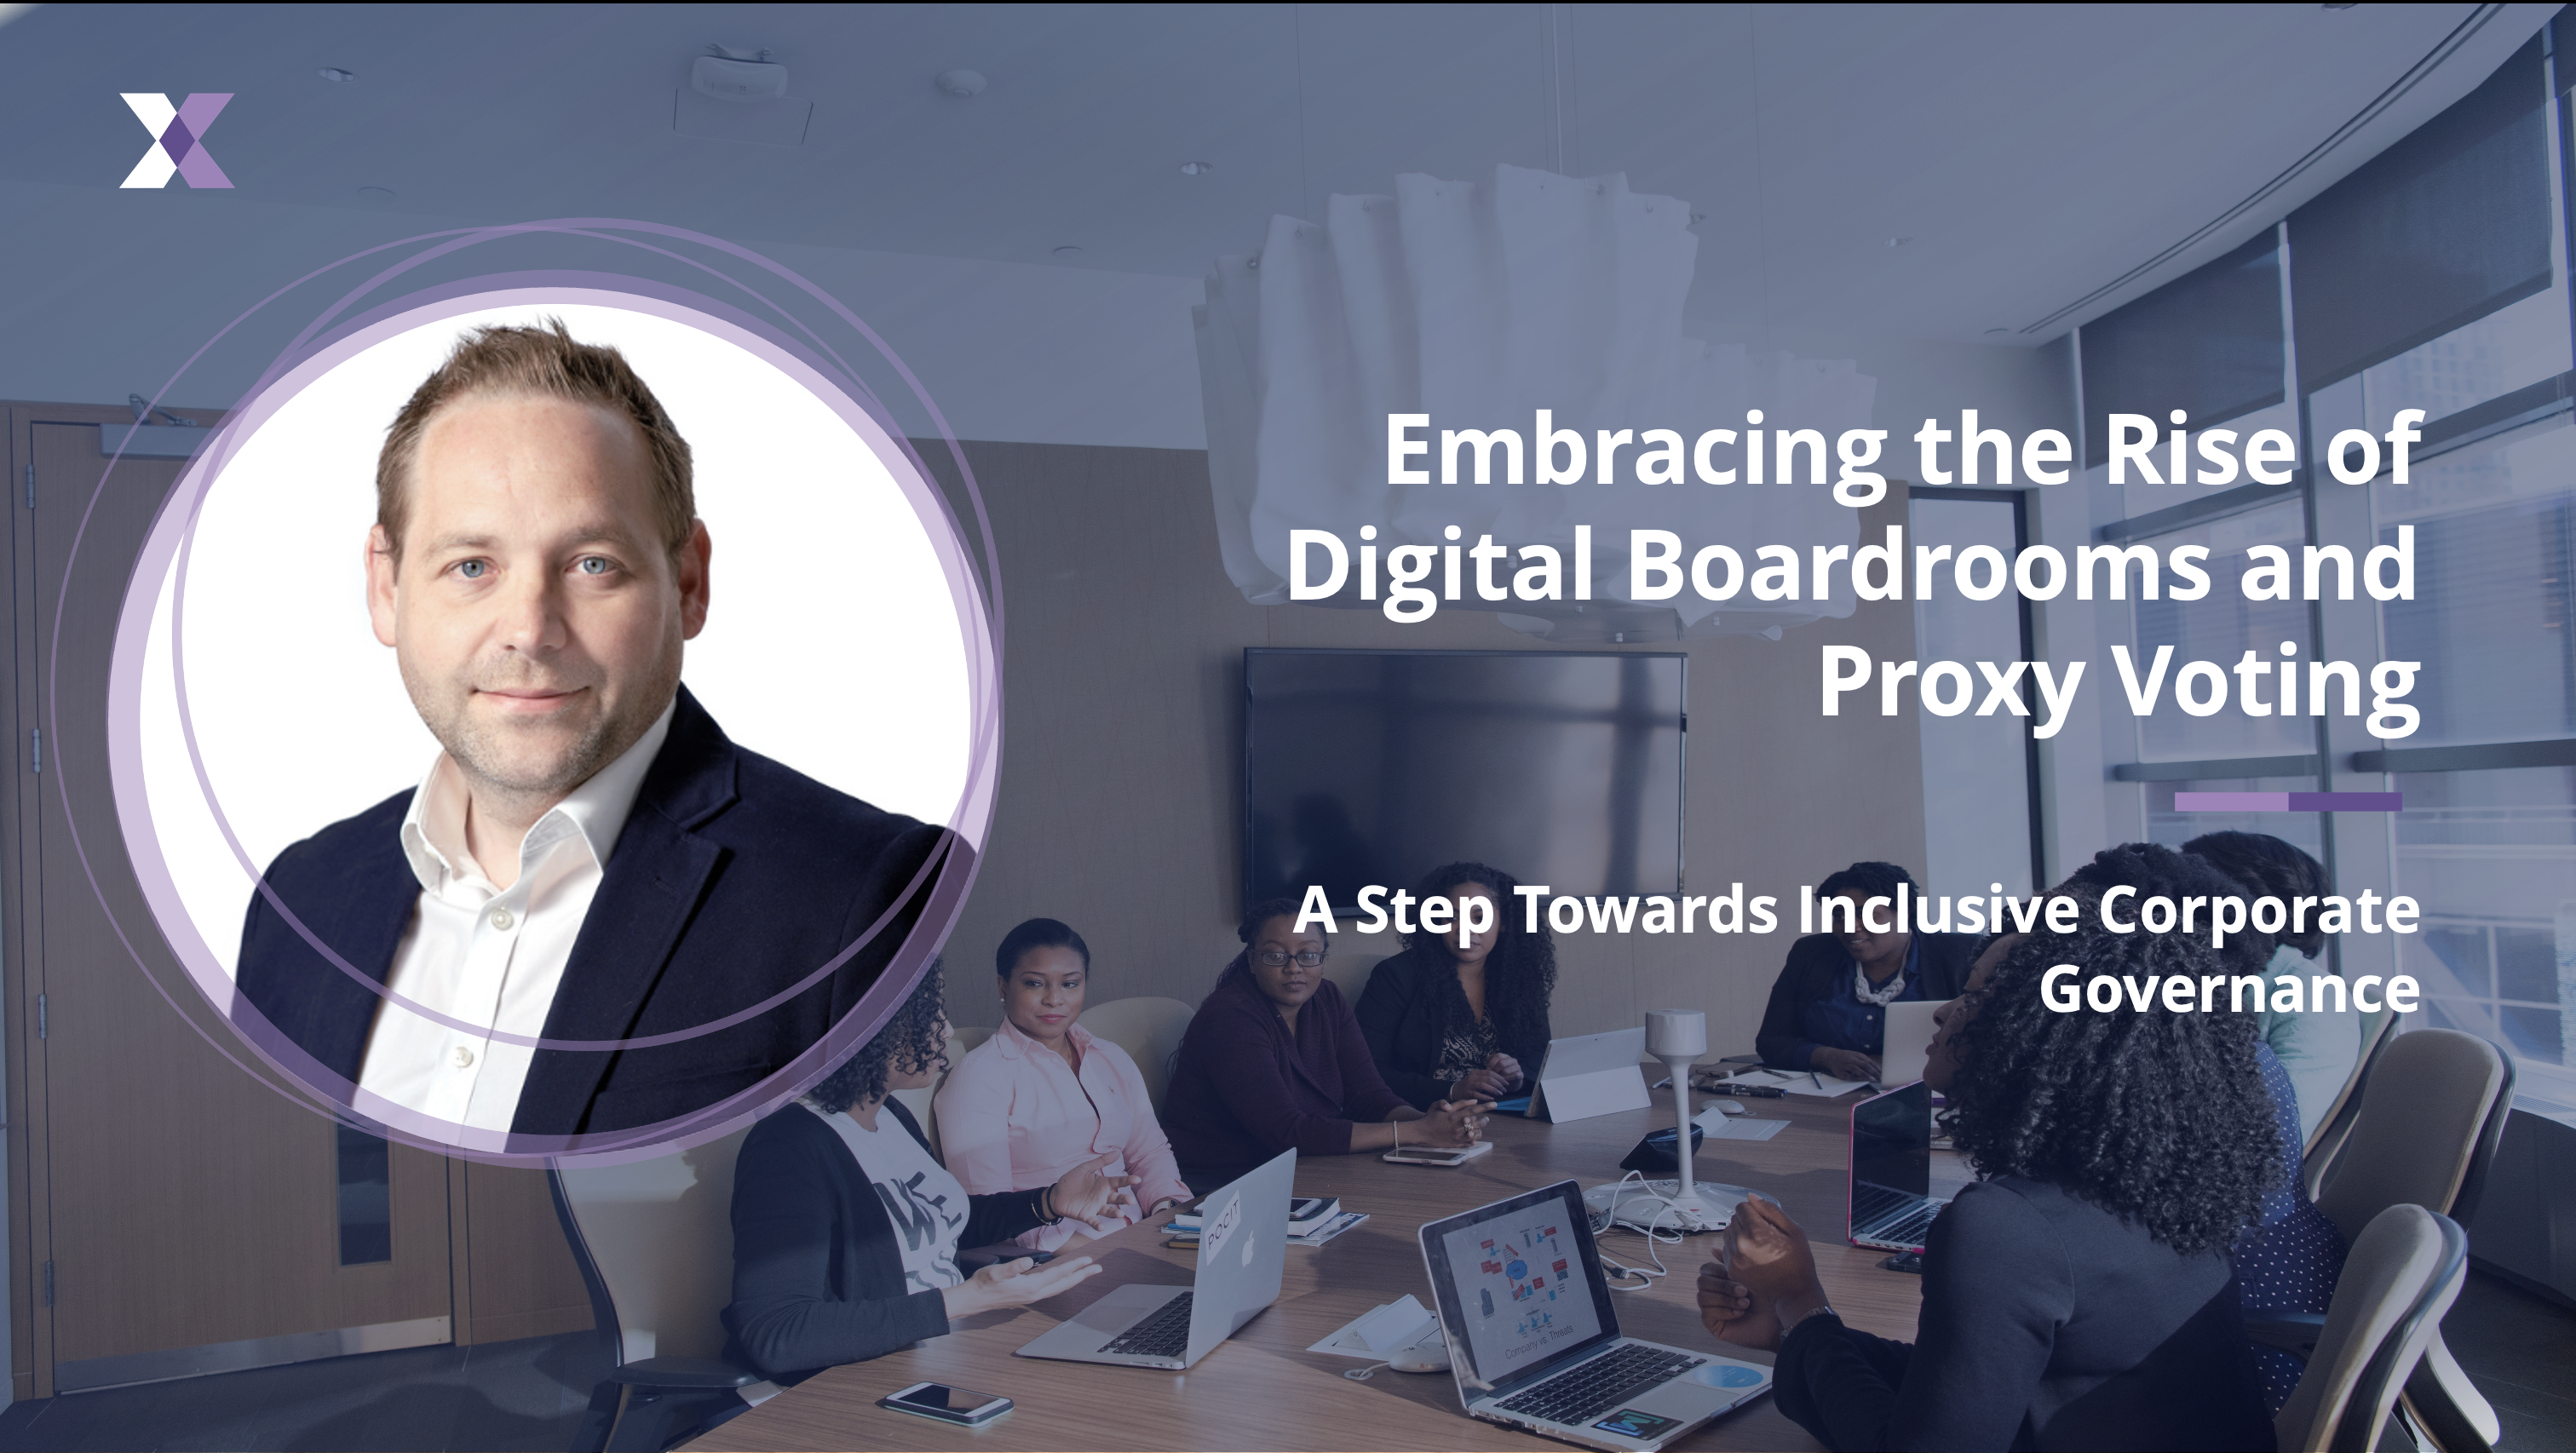 Embracing the Rise of Digital Boardrooms and Proxy Voting: A Step Towards Inclusive Corporate Governance